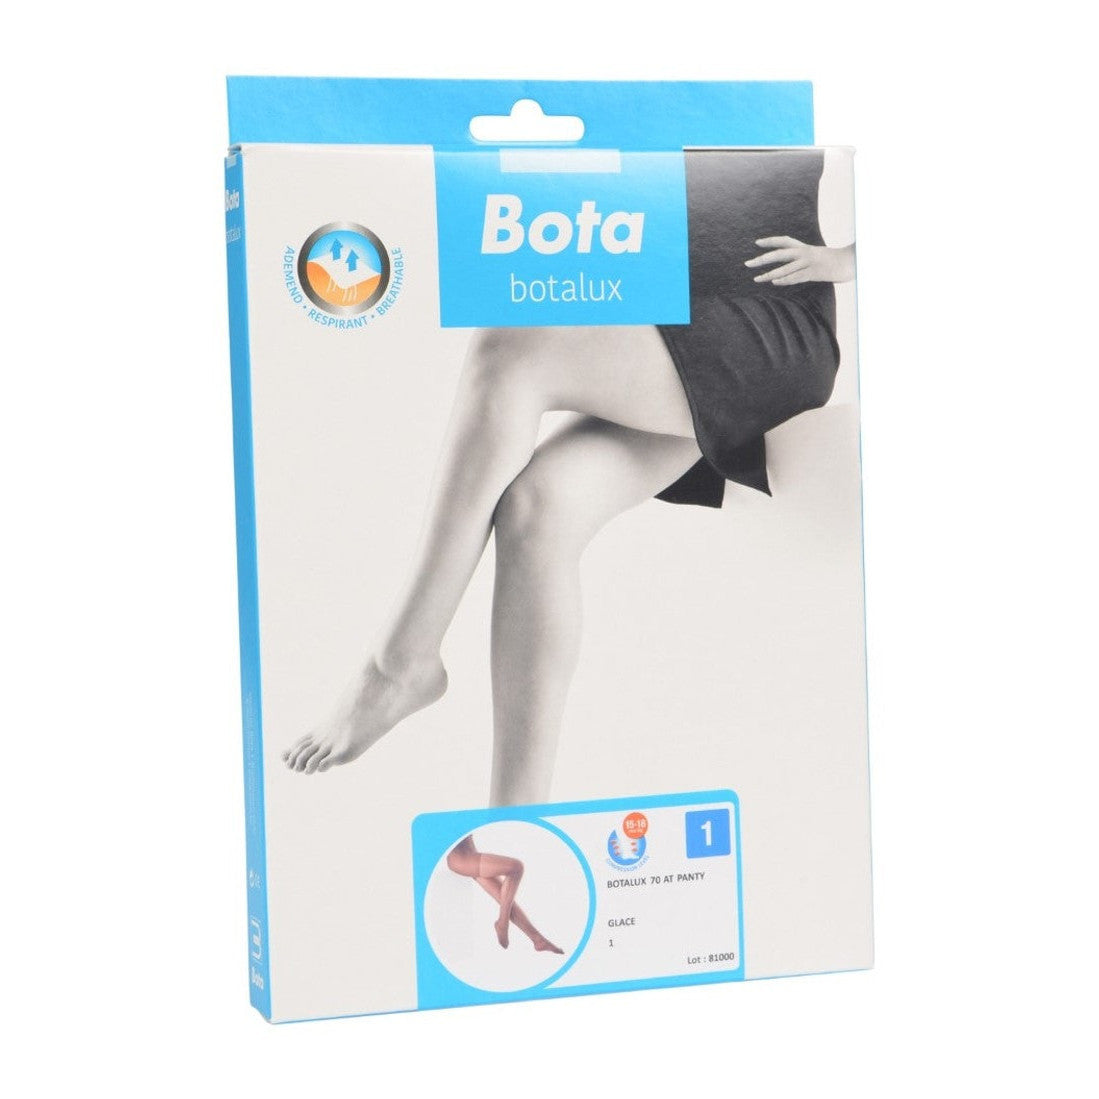 Botalux 70 support tights at glace